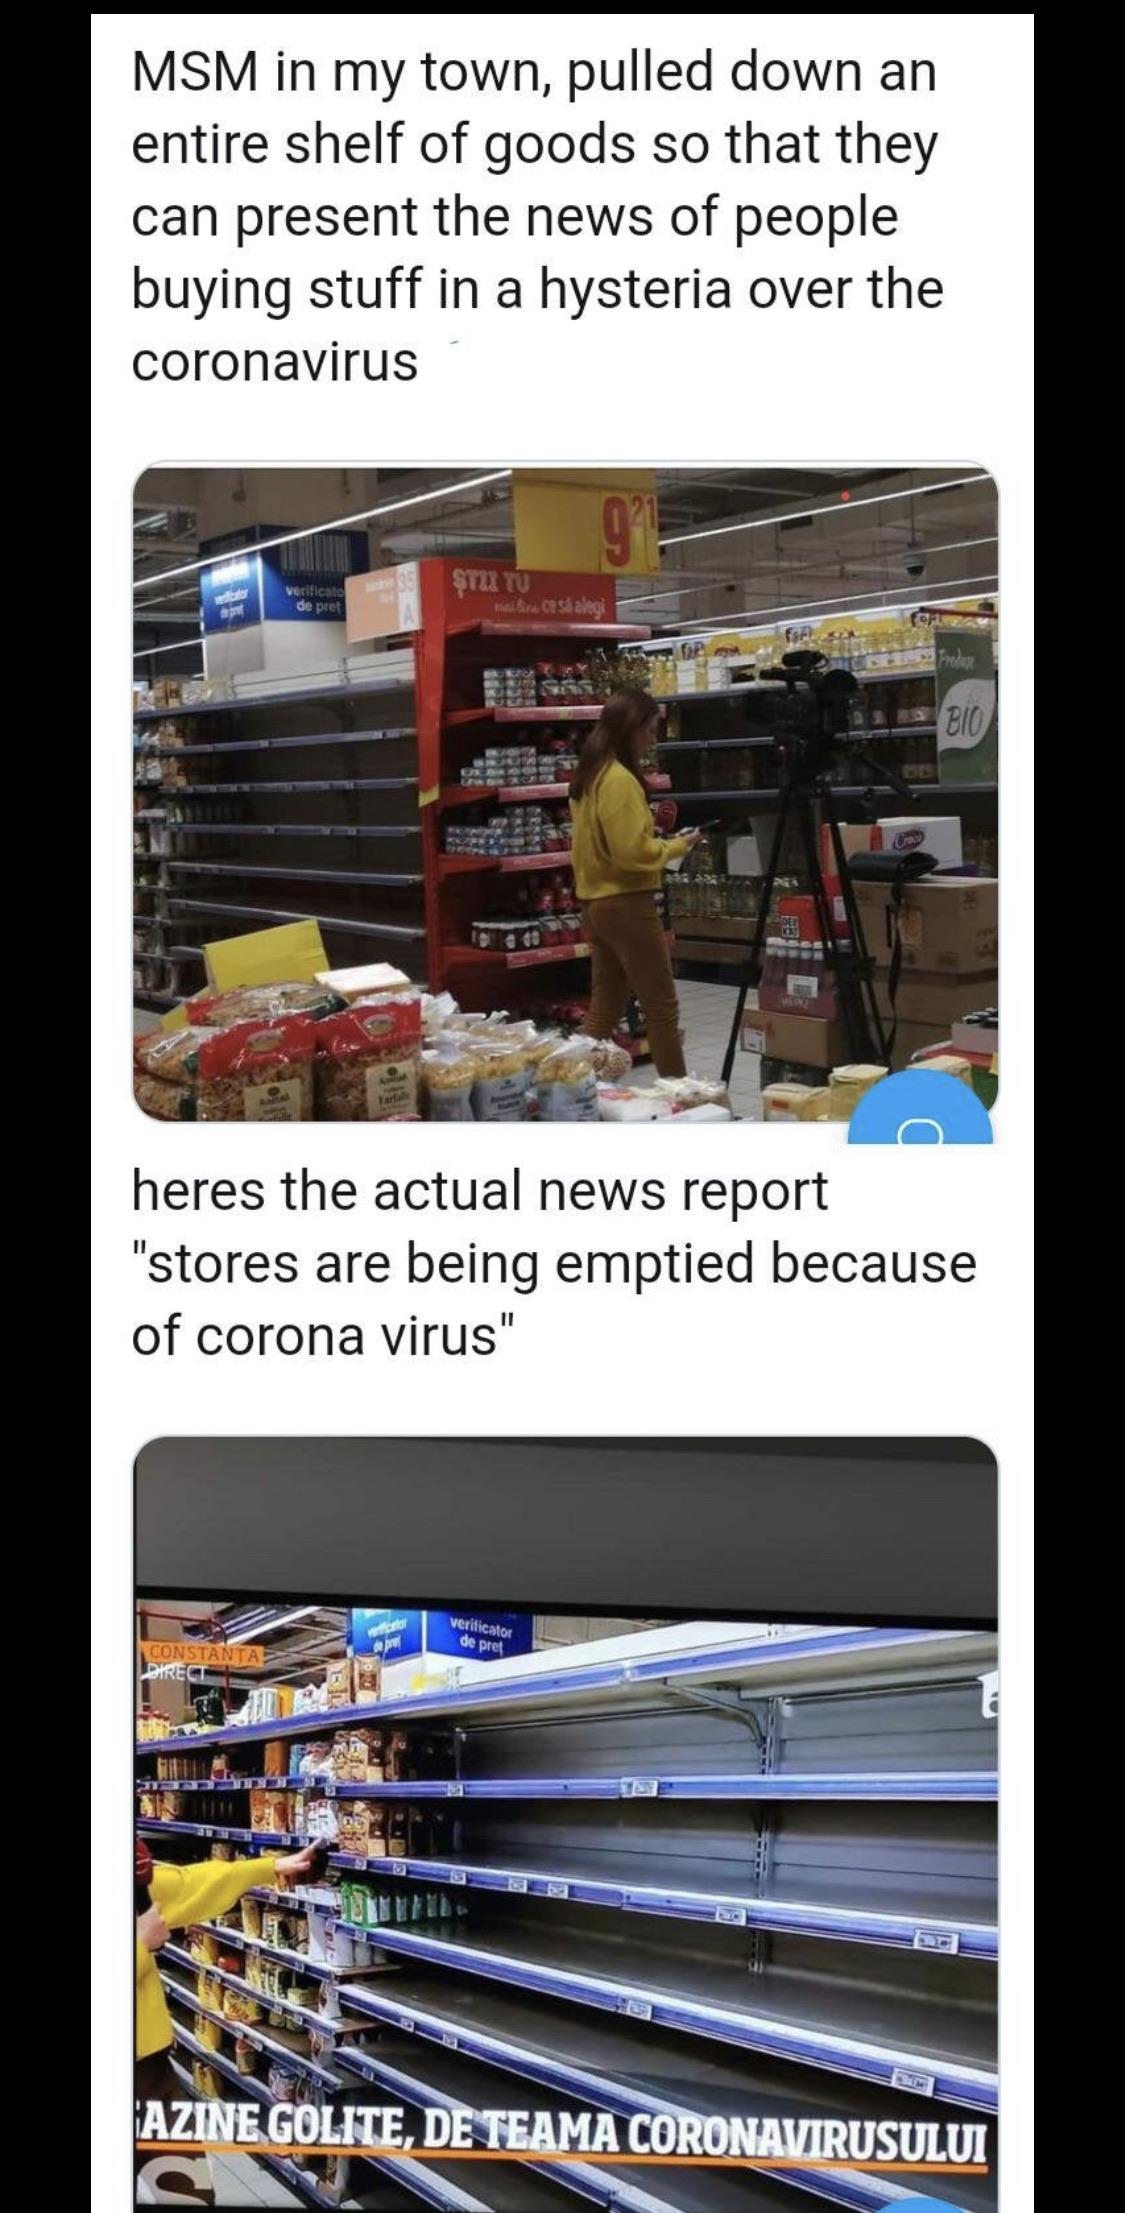 News - Msm in my town, pulled down an entire shelf of goods so that they can present the news of people buying stuff in a hysteria over the coronavirus verificato Stutu Meira Sack De Do 010 heres the actual news report "stores are being emptied because of